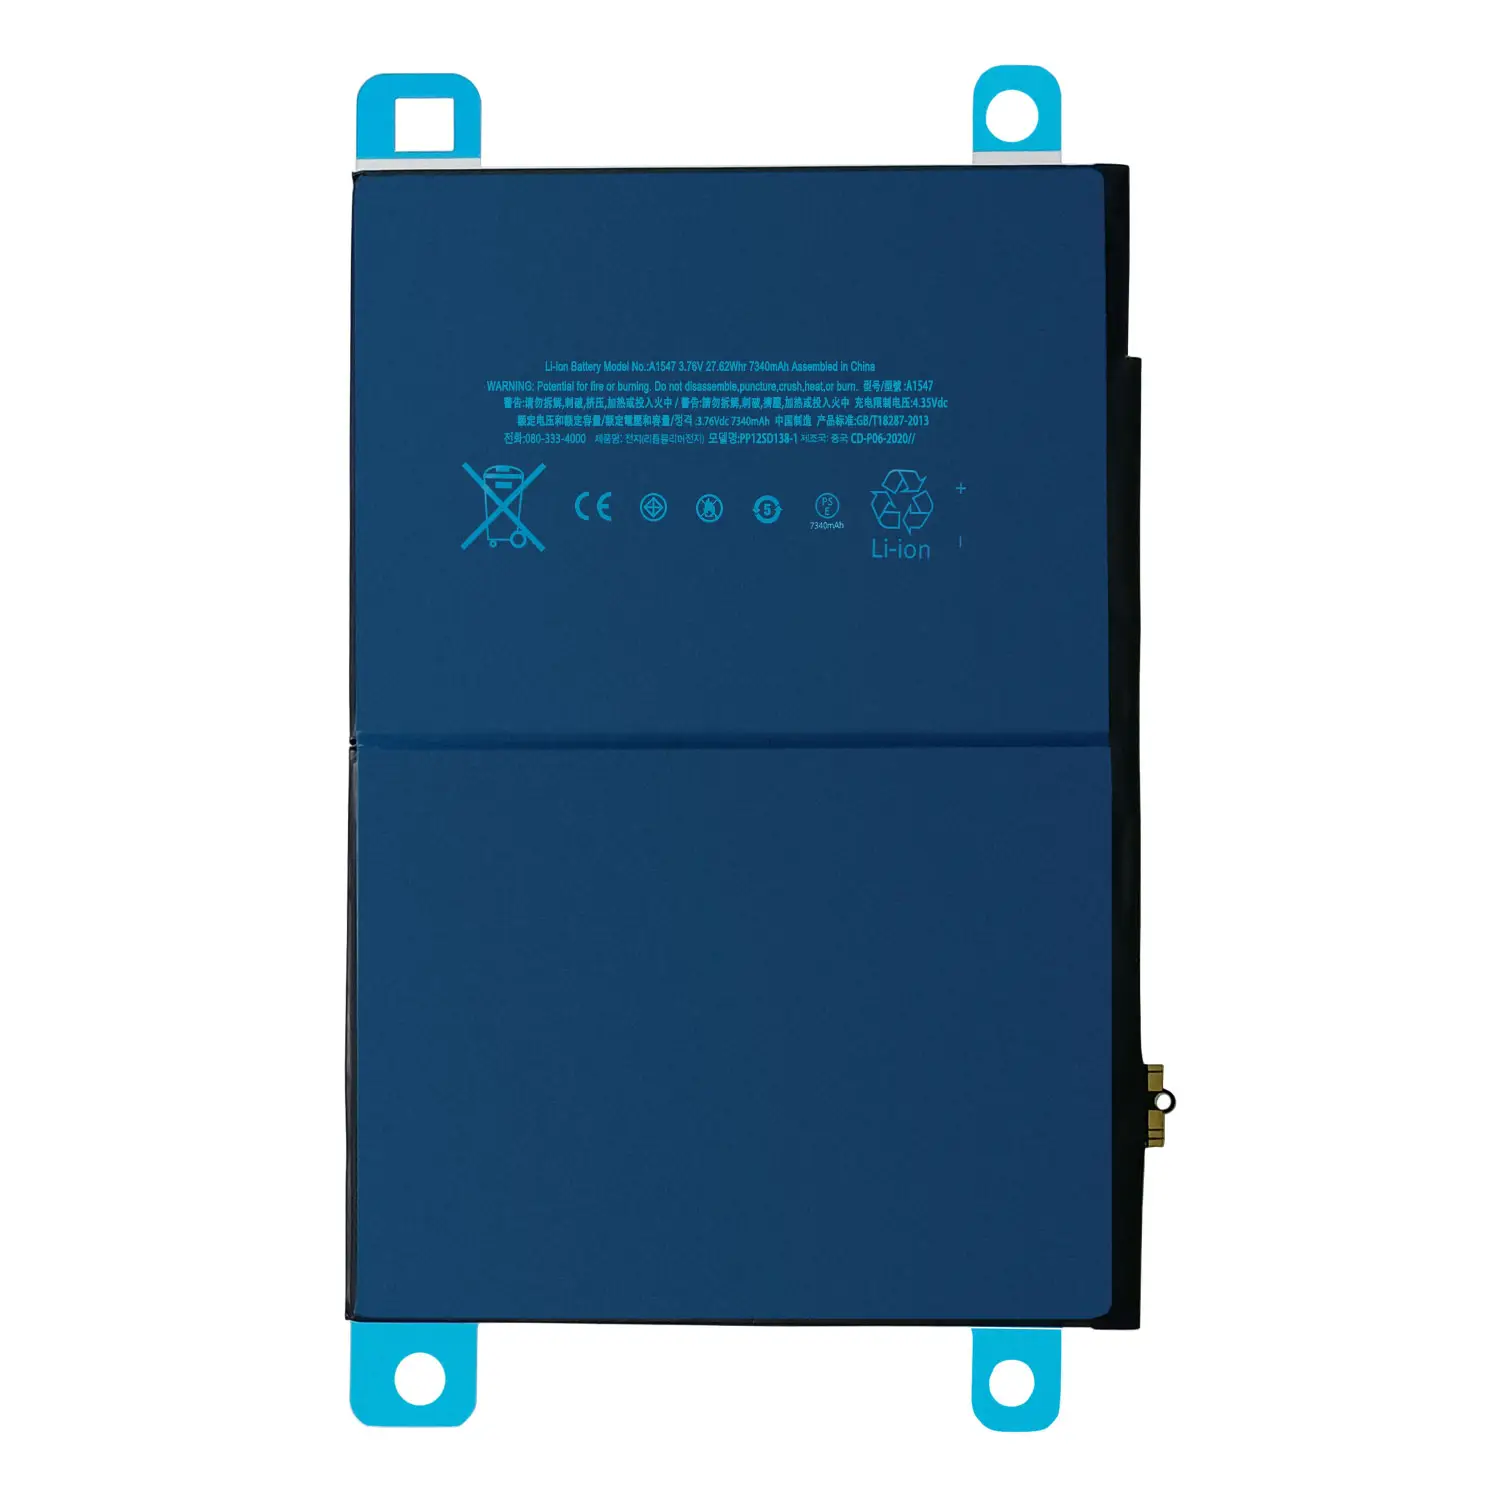 100% original 3.76v 7340mah New Oem ipad 6 Air 2 Tablet Battery Replacement For A1547 all models for iPad